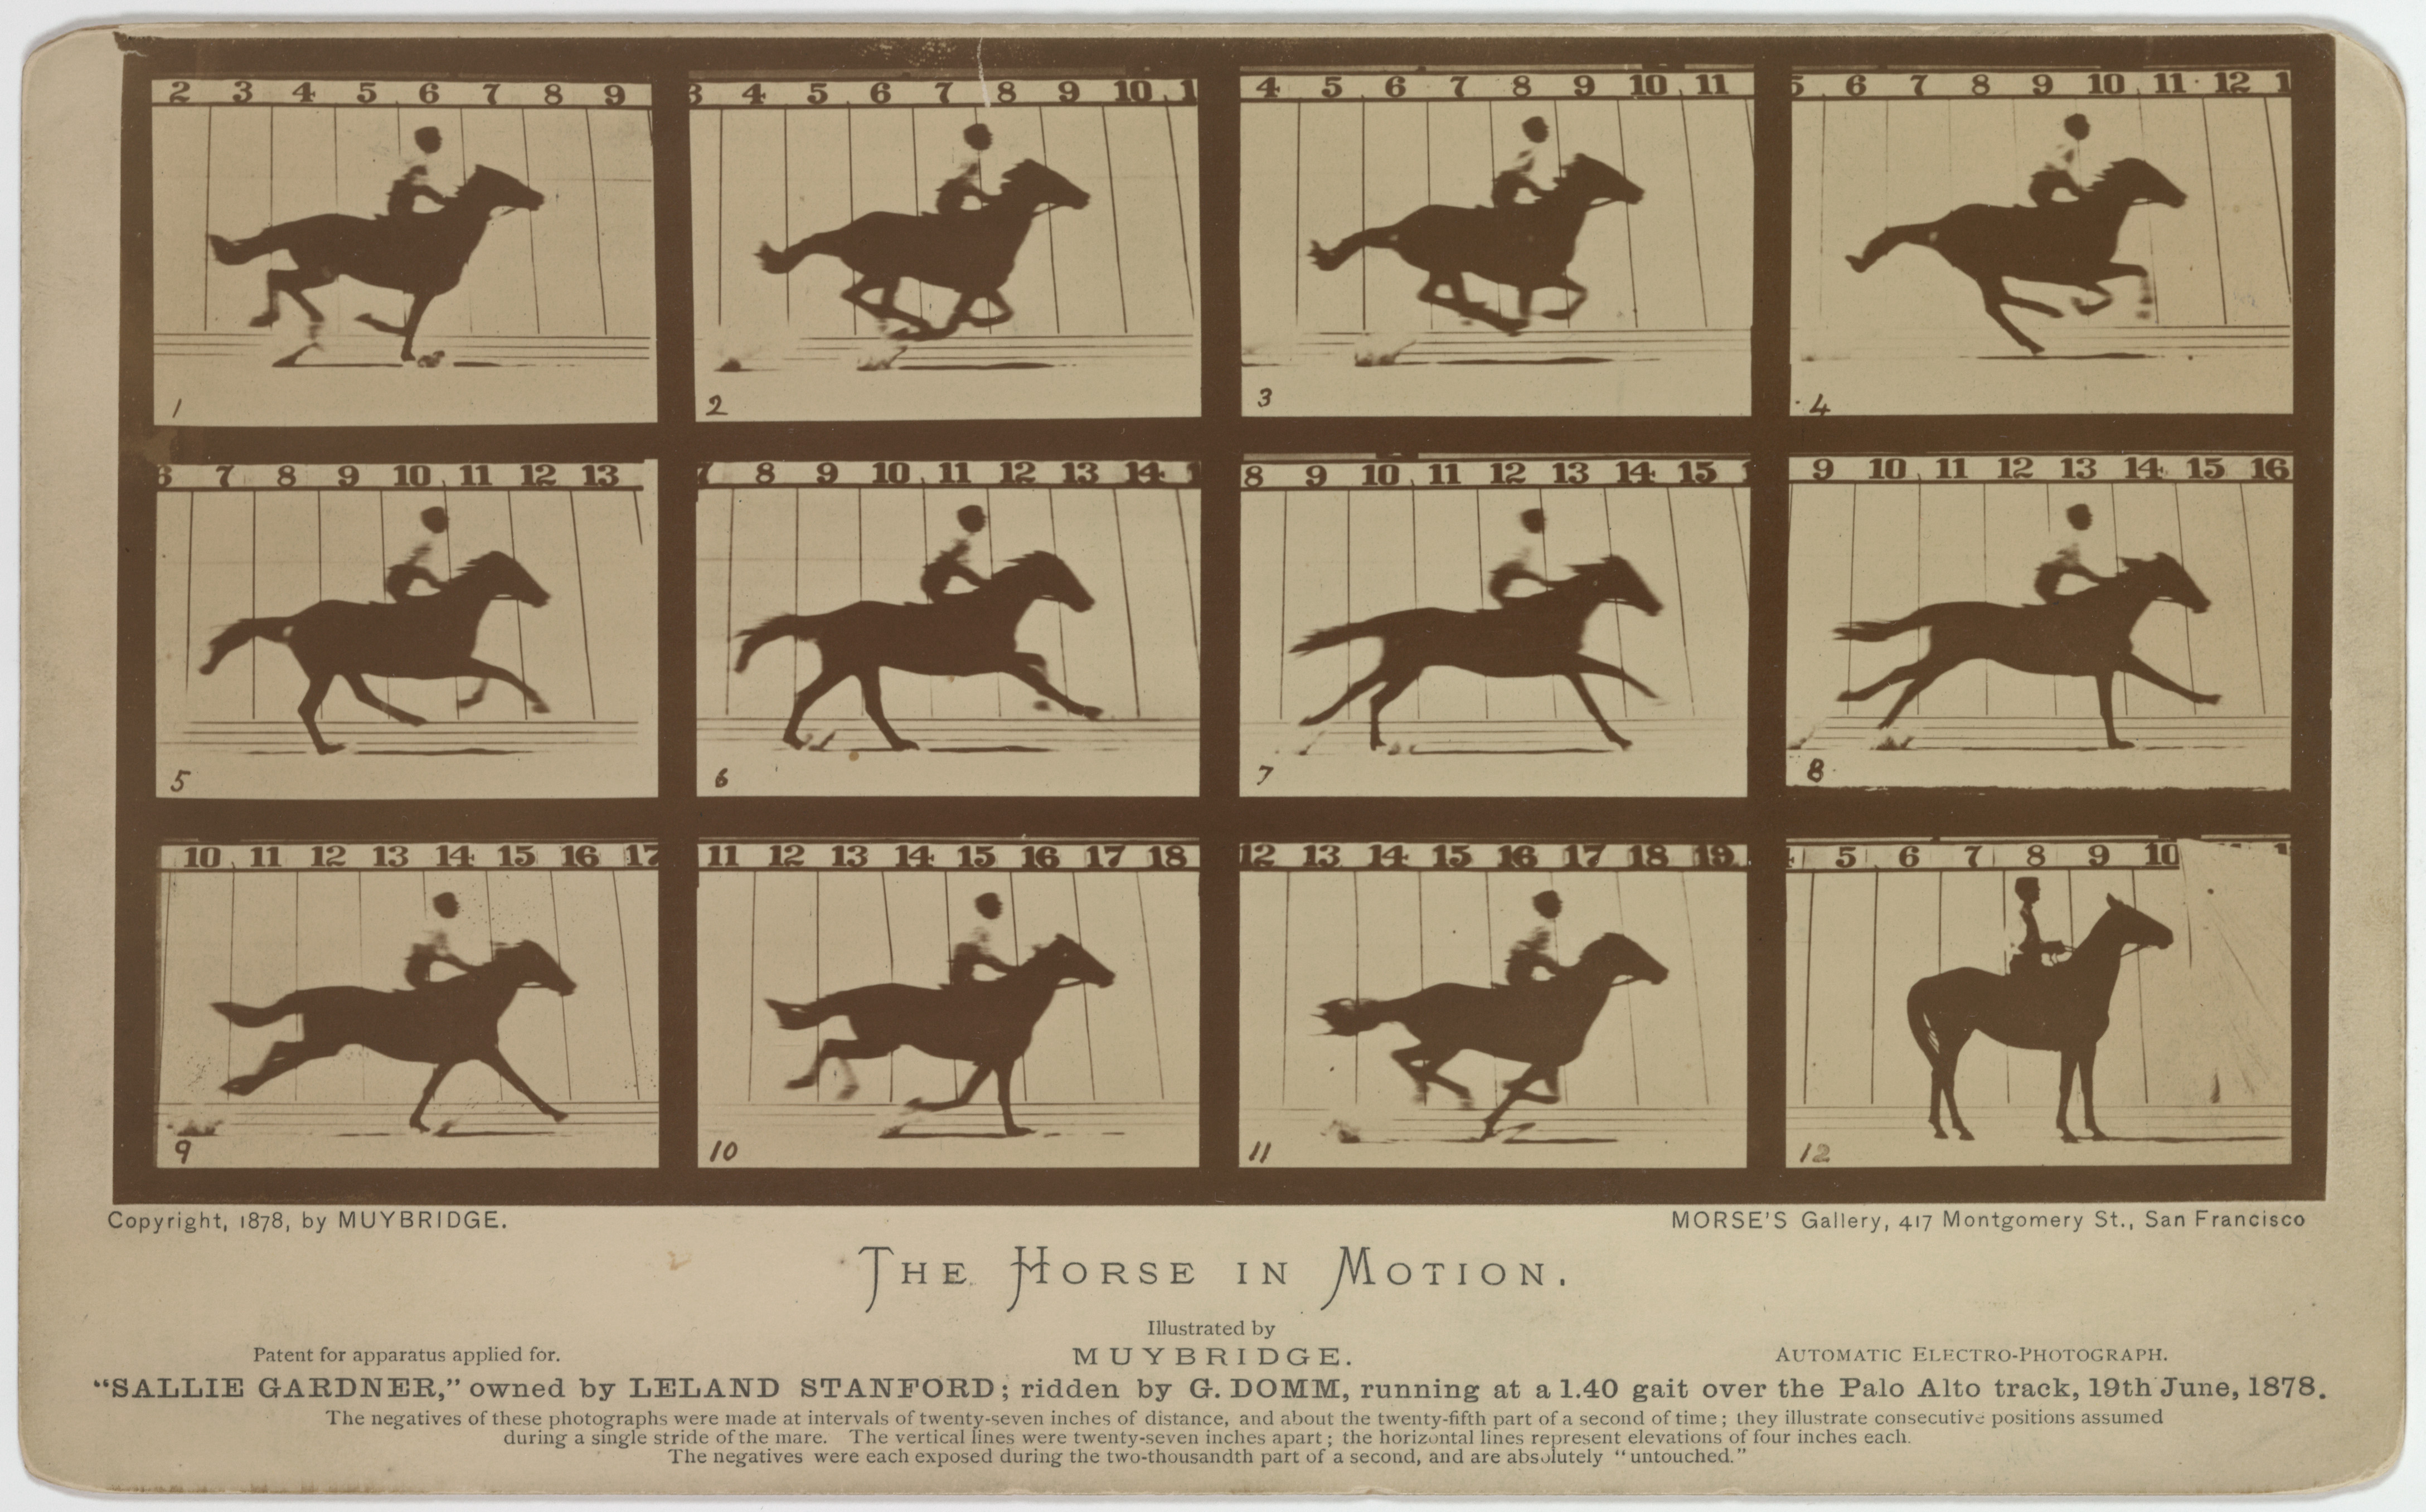 A four wide by three deep collage of photos showing a horse running that includes one frame where all four of the horse's feet are off the ground